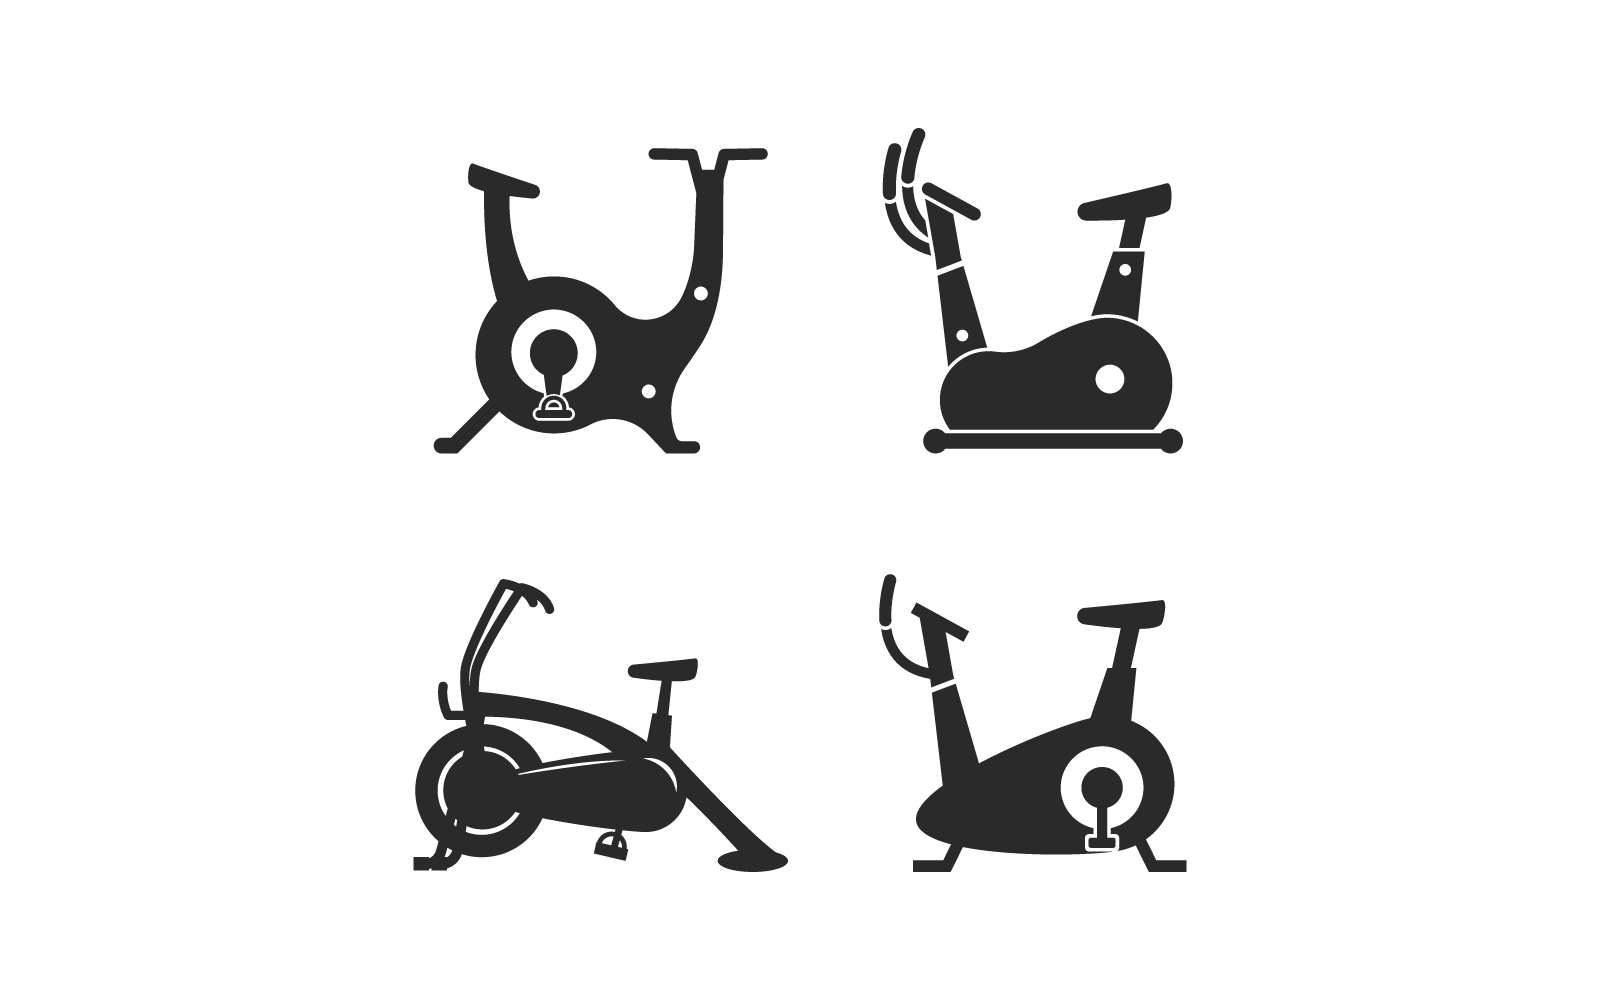 Exercise bicycle fitness illustration icon vector flat design